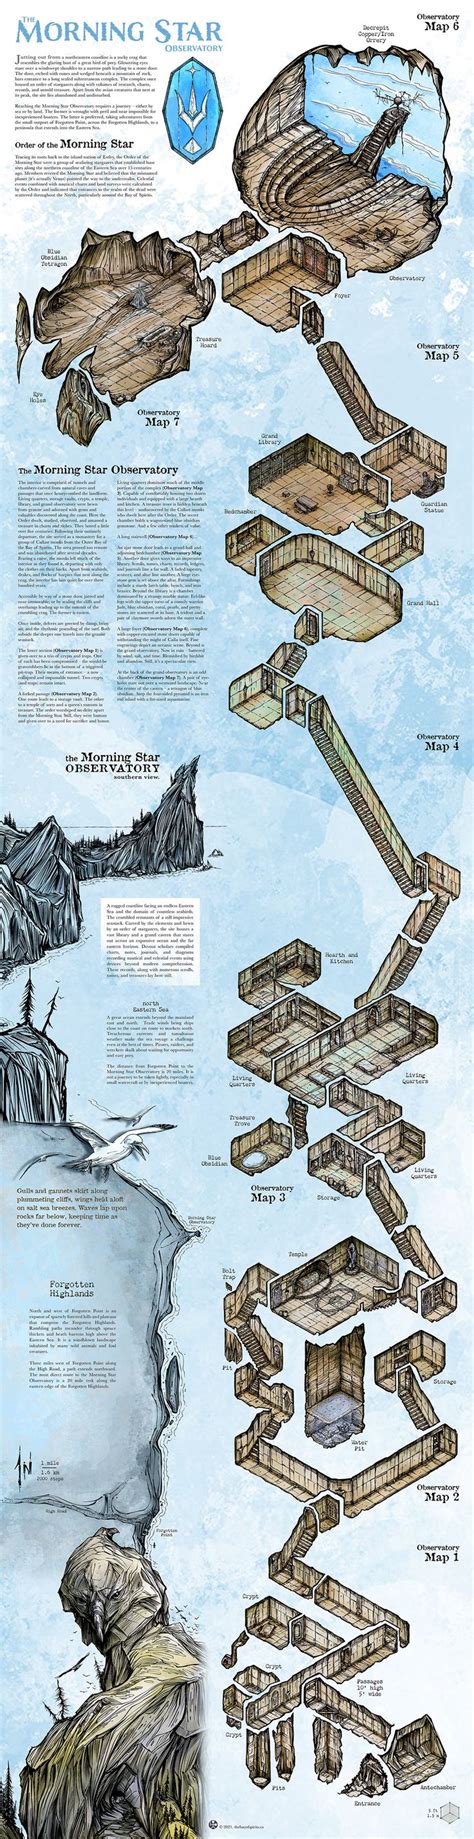 The Morning Star Observatory Isometric Map Dungeon Maps Fantasy Map